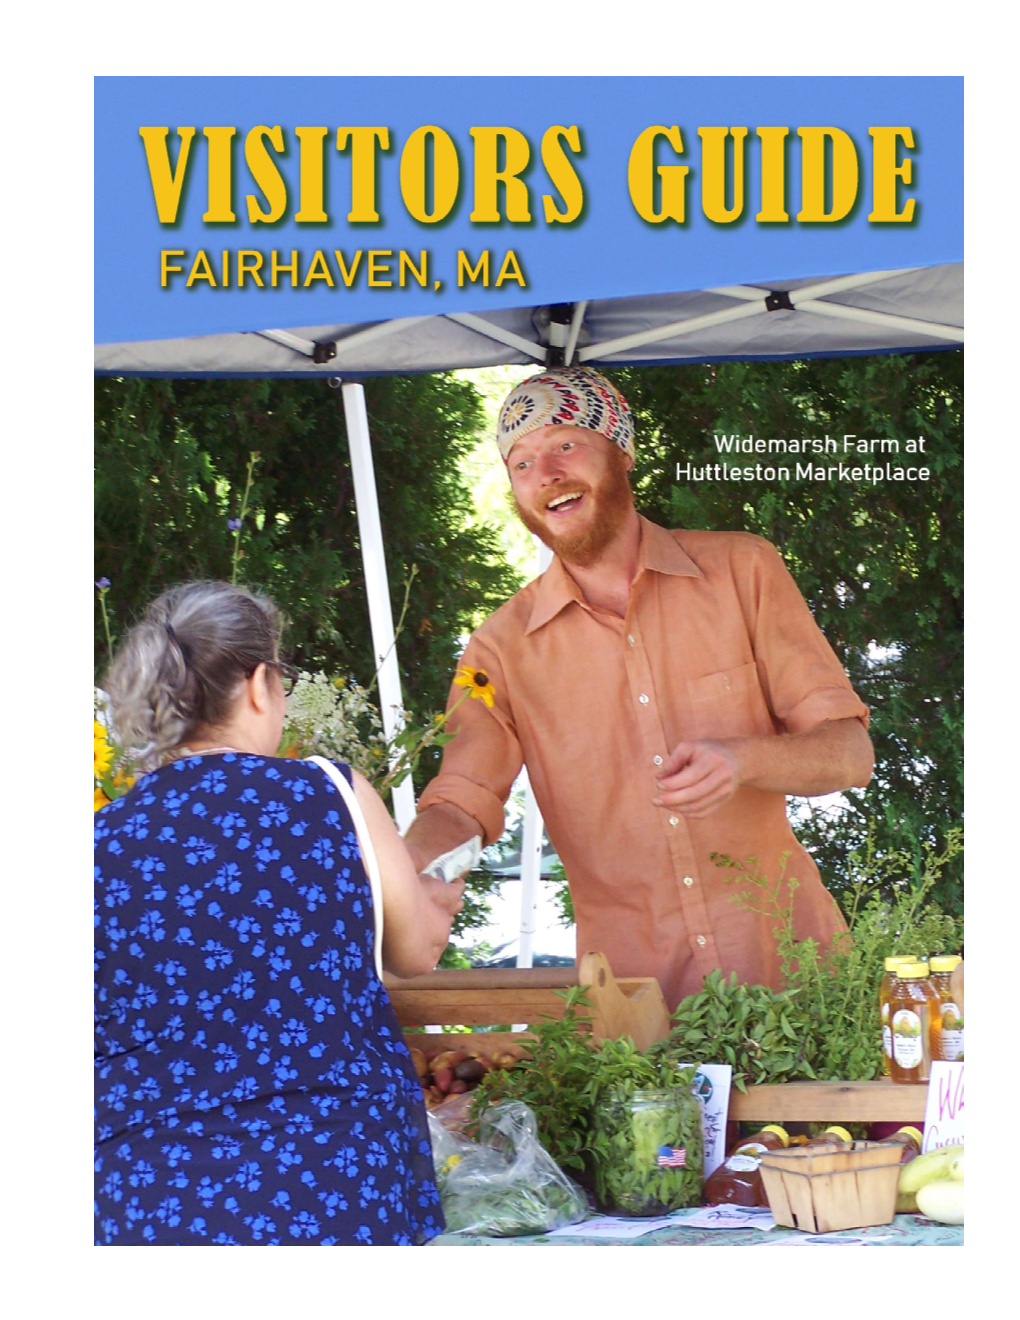 C:\Users\Crichard\Documents\Guide Book\Fairhaven Tours Book 2019